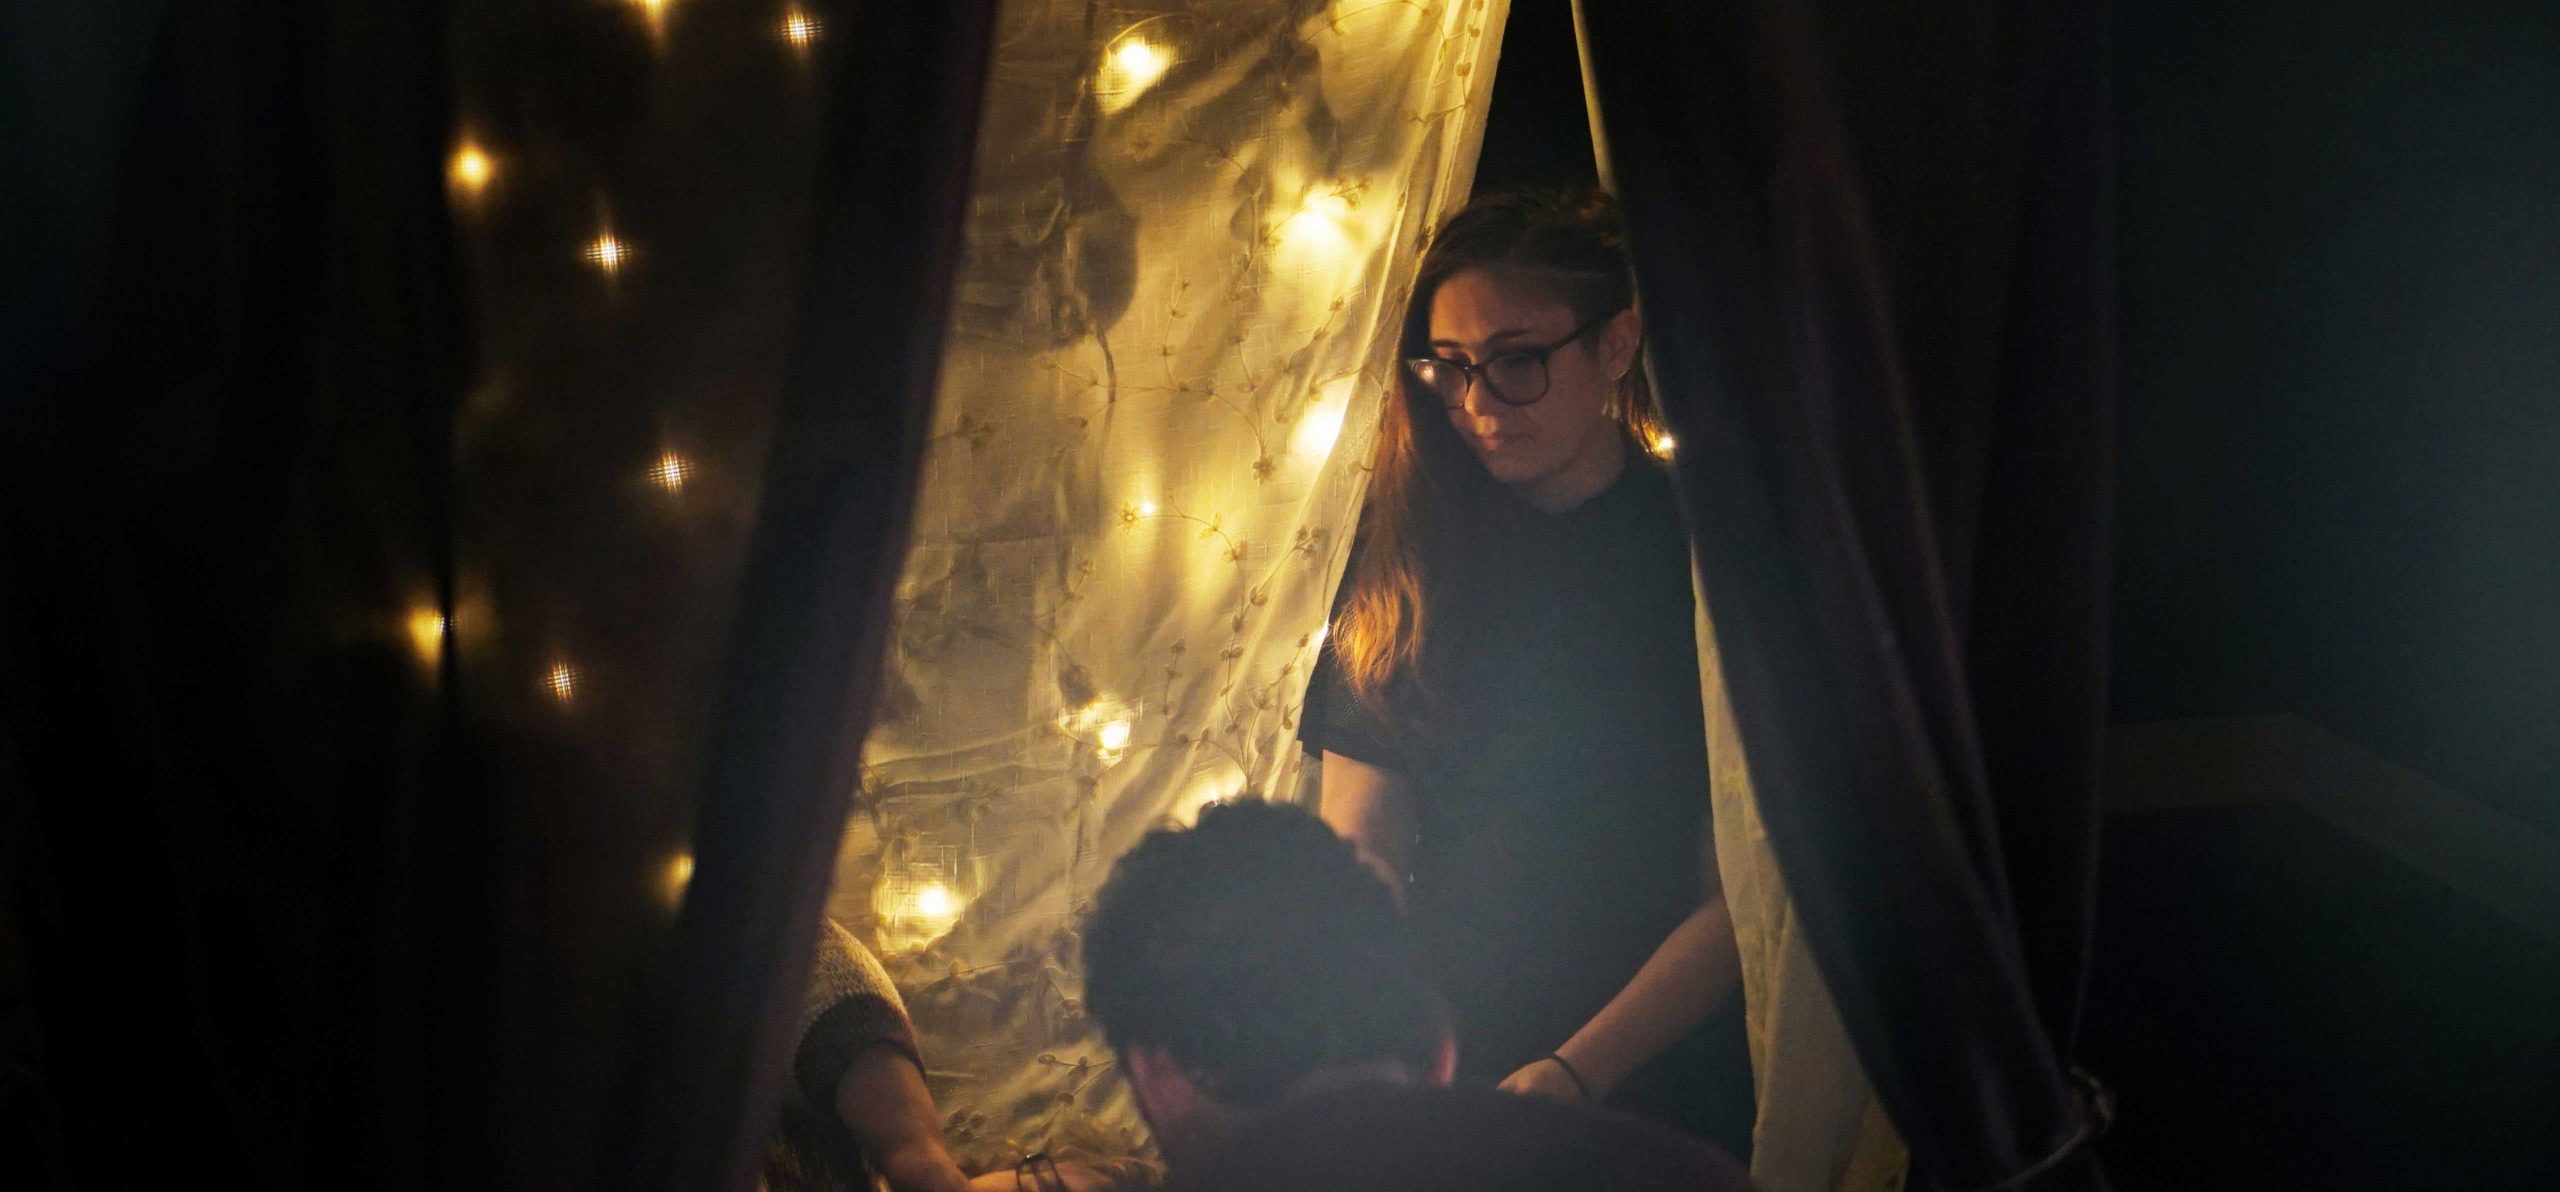 Three people sit on the floor facing each other. They're enclosed by curtains with string lights.